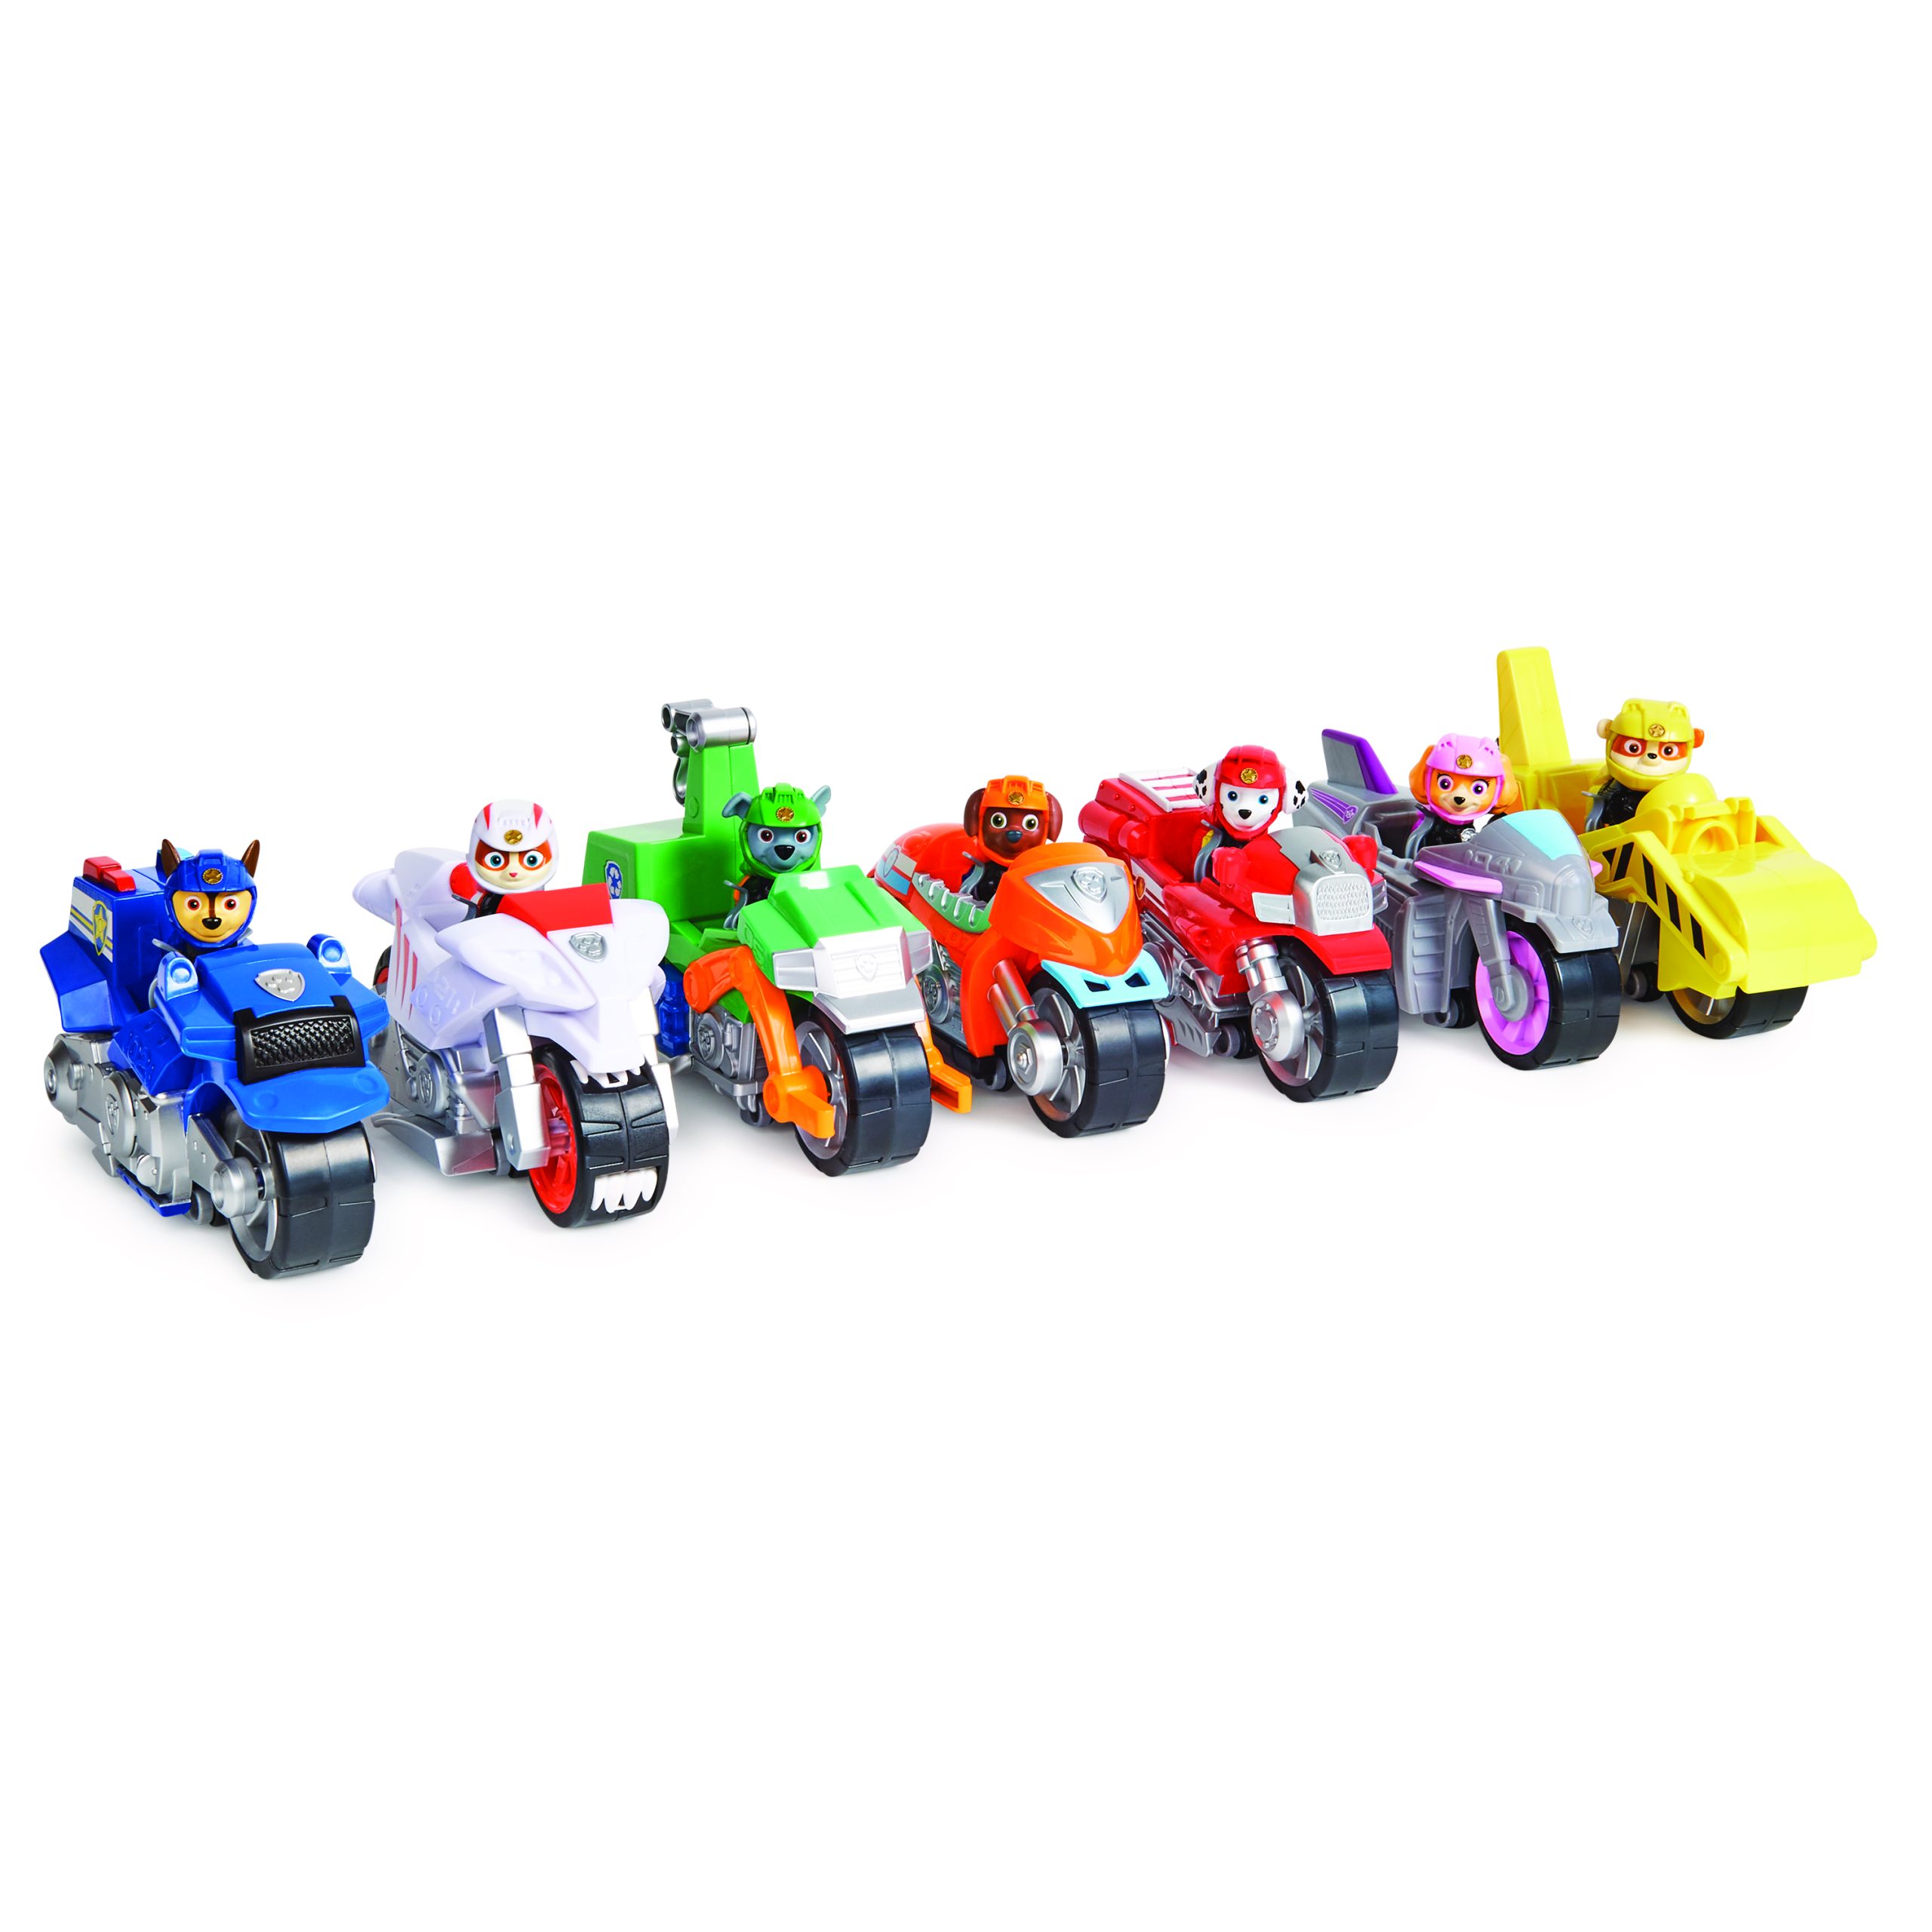 Spin Master Paw Patrol - Moto Pups - Chase Deluxe Vehicle